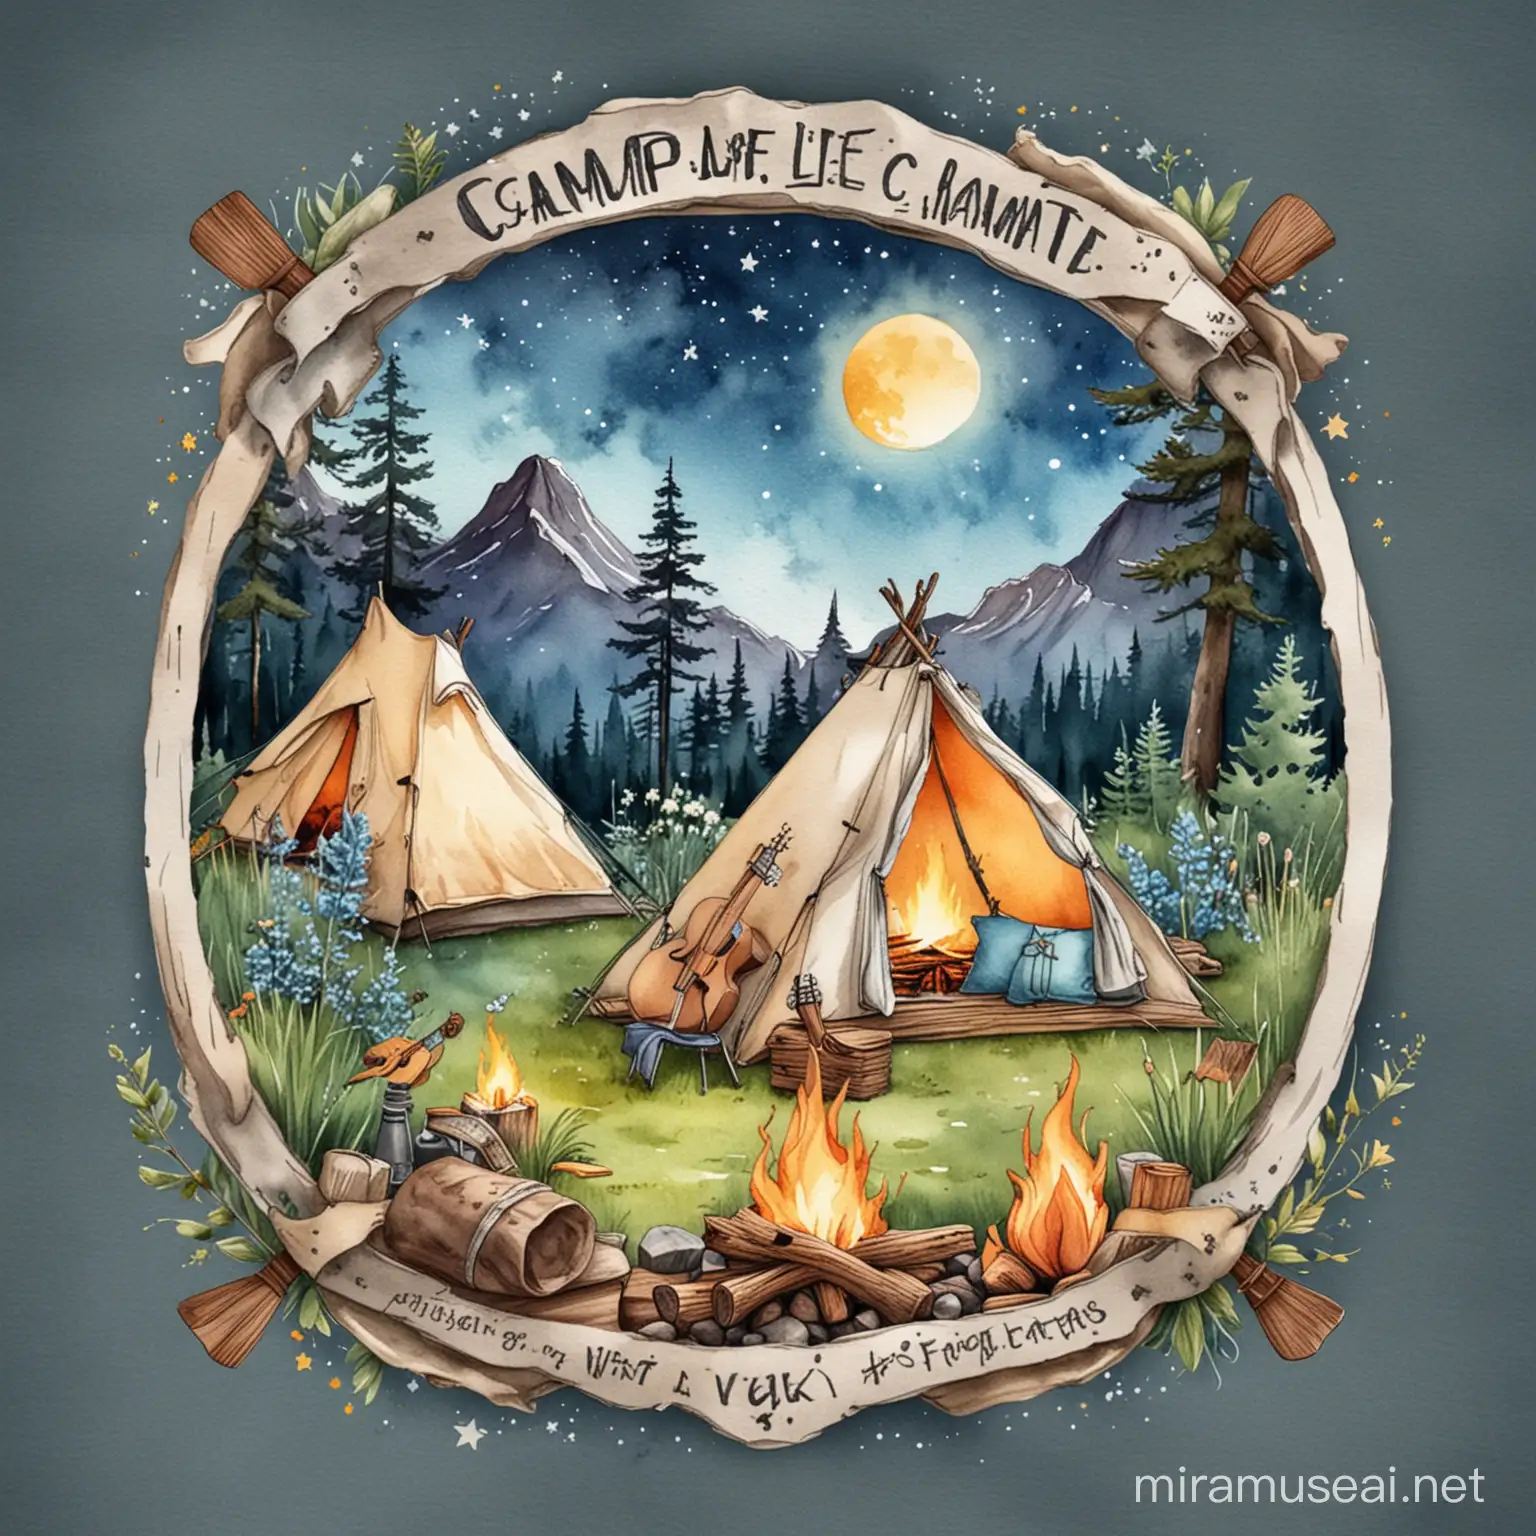 Camp Life Watercolor Sublimation Clipart with Black Outline . Create a flat 3D scene in a clean, simple style perfect for a bluegrass music festival t-shirt.  Use a white background and incorporate elements of a vibrant campsite scene, including a tent, campfire, musical instruments (guitar, banjo), and natural elements like lush blue grass and a starry night sky.  Use a watercolor painting style. Maintain a clean and professional aesthetic.  --v 5.2-